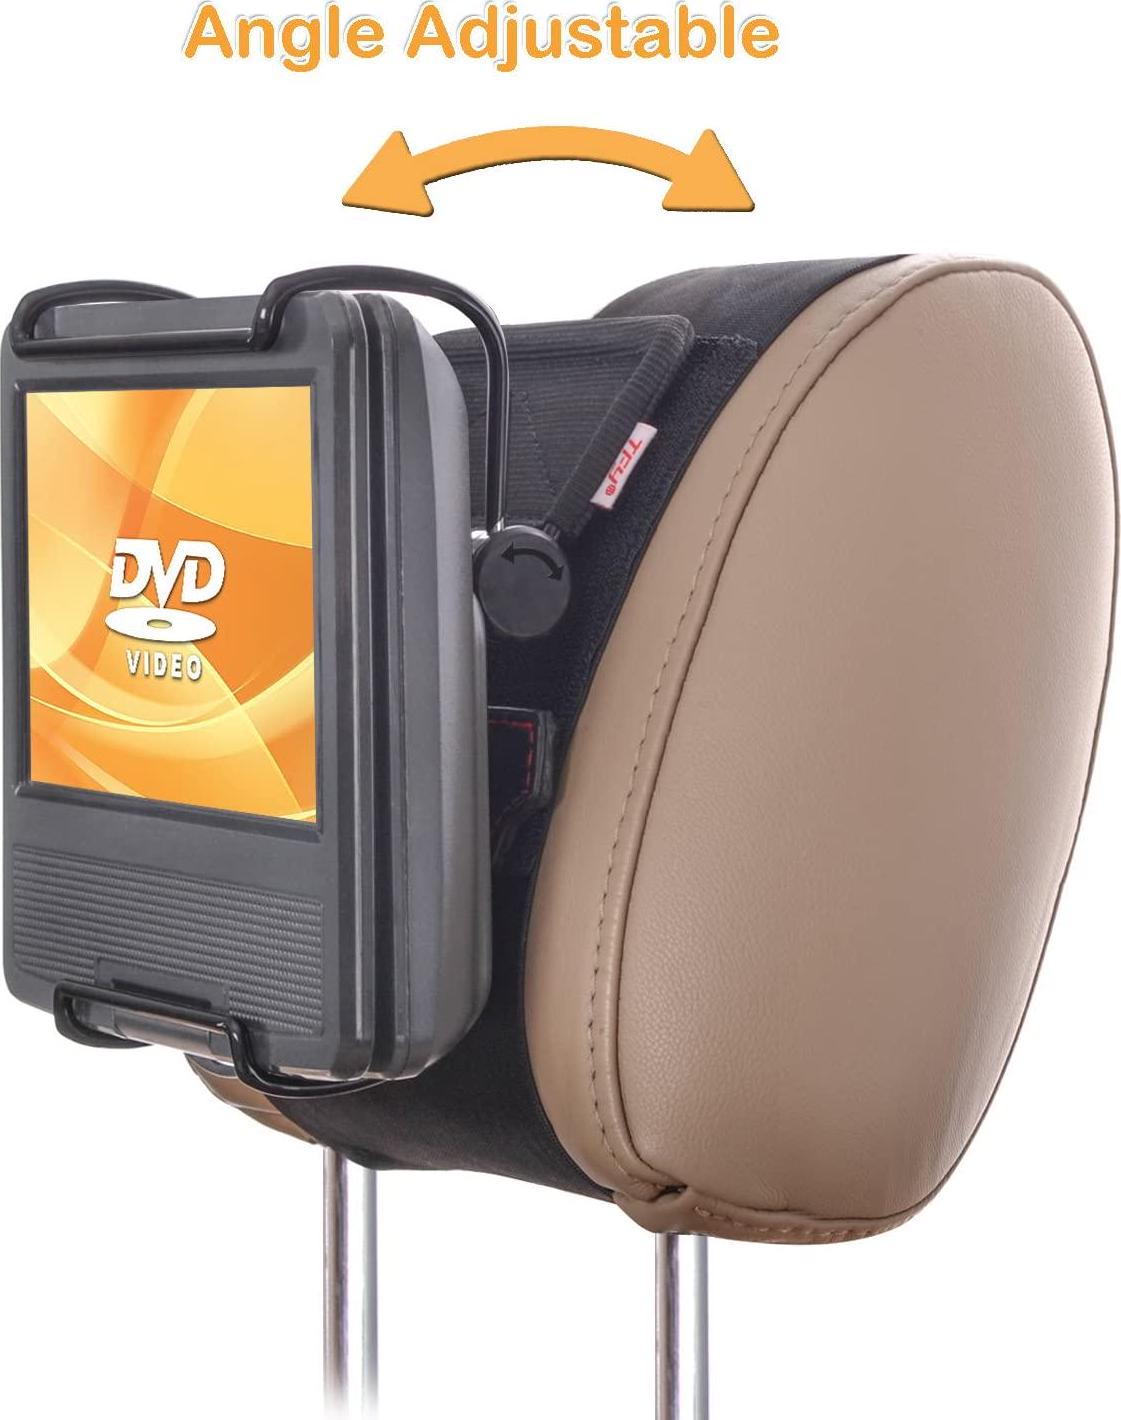 TFY, TFY Universal Car Headrest Mount Holder with Angle- Adjustable Holding Clamp for 7 - 9 Inch Swivel Screen Portable DVD Players, Black